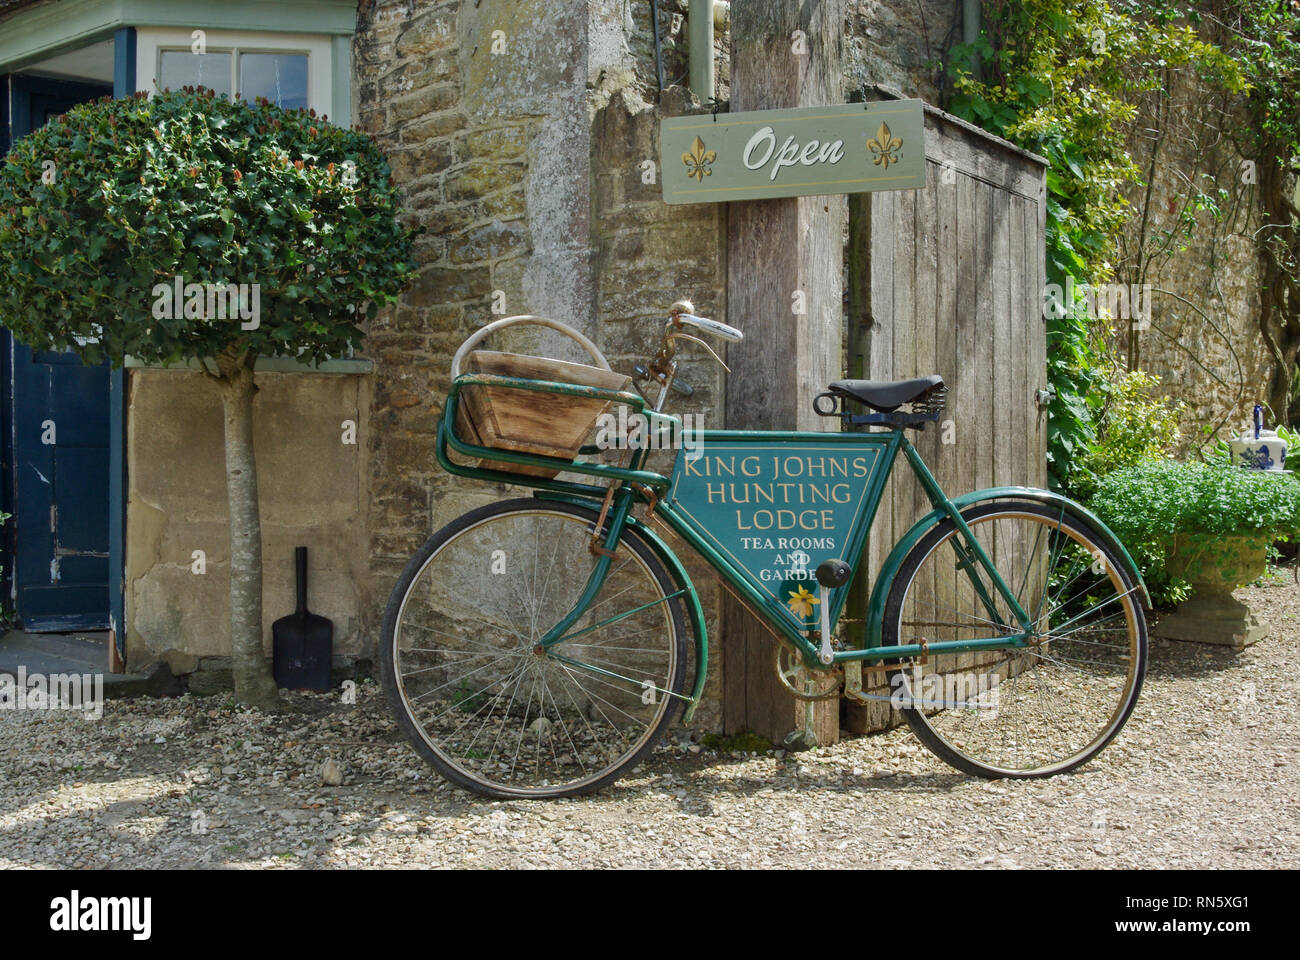 A sign, incorporated into an old bicycle, for King John's Hunting Lodge, tea rooms and restaurant in the historic village of Lacock, UK Stock Photo